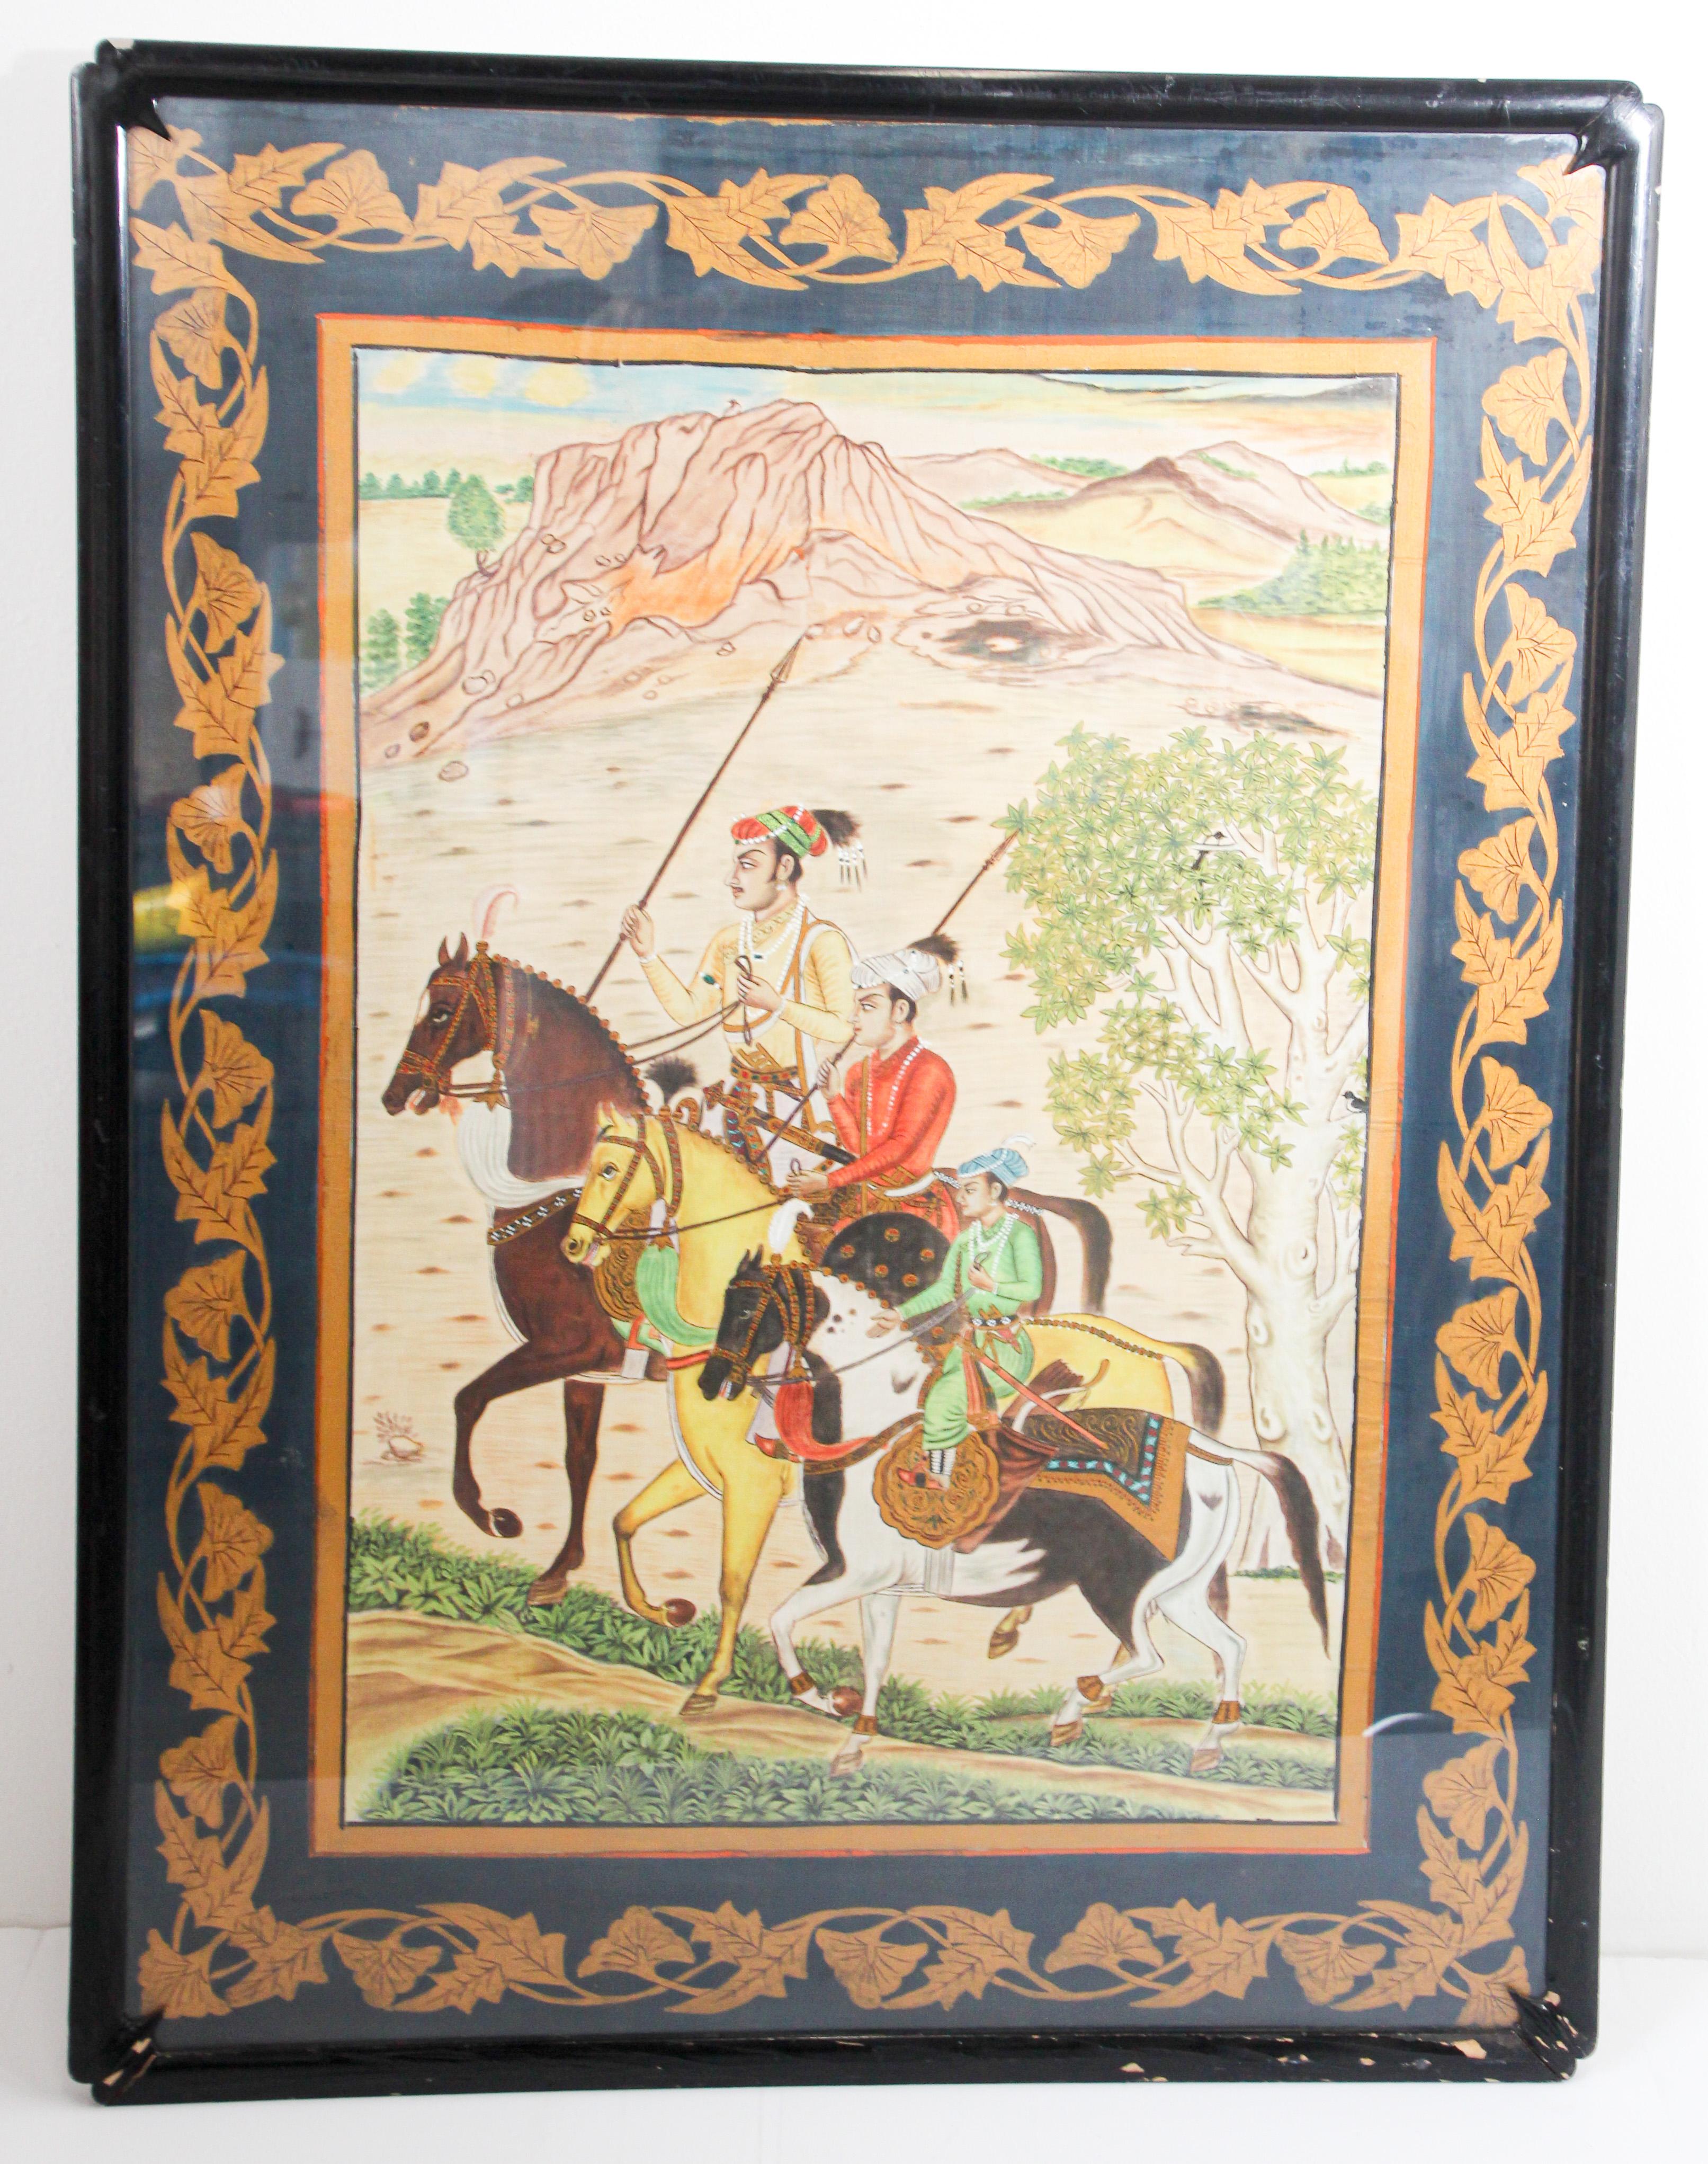 Indian Mughal style 19th century Indian painting scene of Maharajahs with period traditional costumes hunting on horse.
Indian Mughal School painting on silk Circa 1950.
Scene is of Emperor Shah Jahan's Three Sons: the sons of the Maharajah hunting